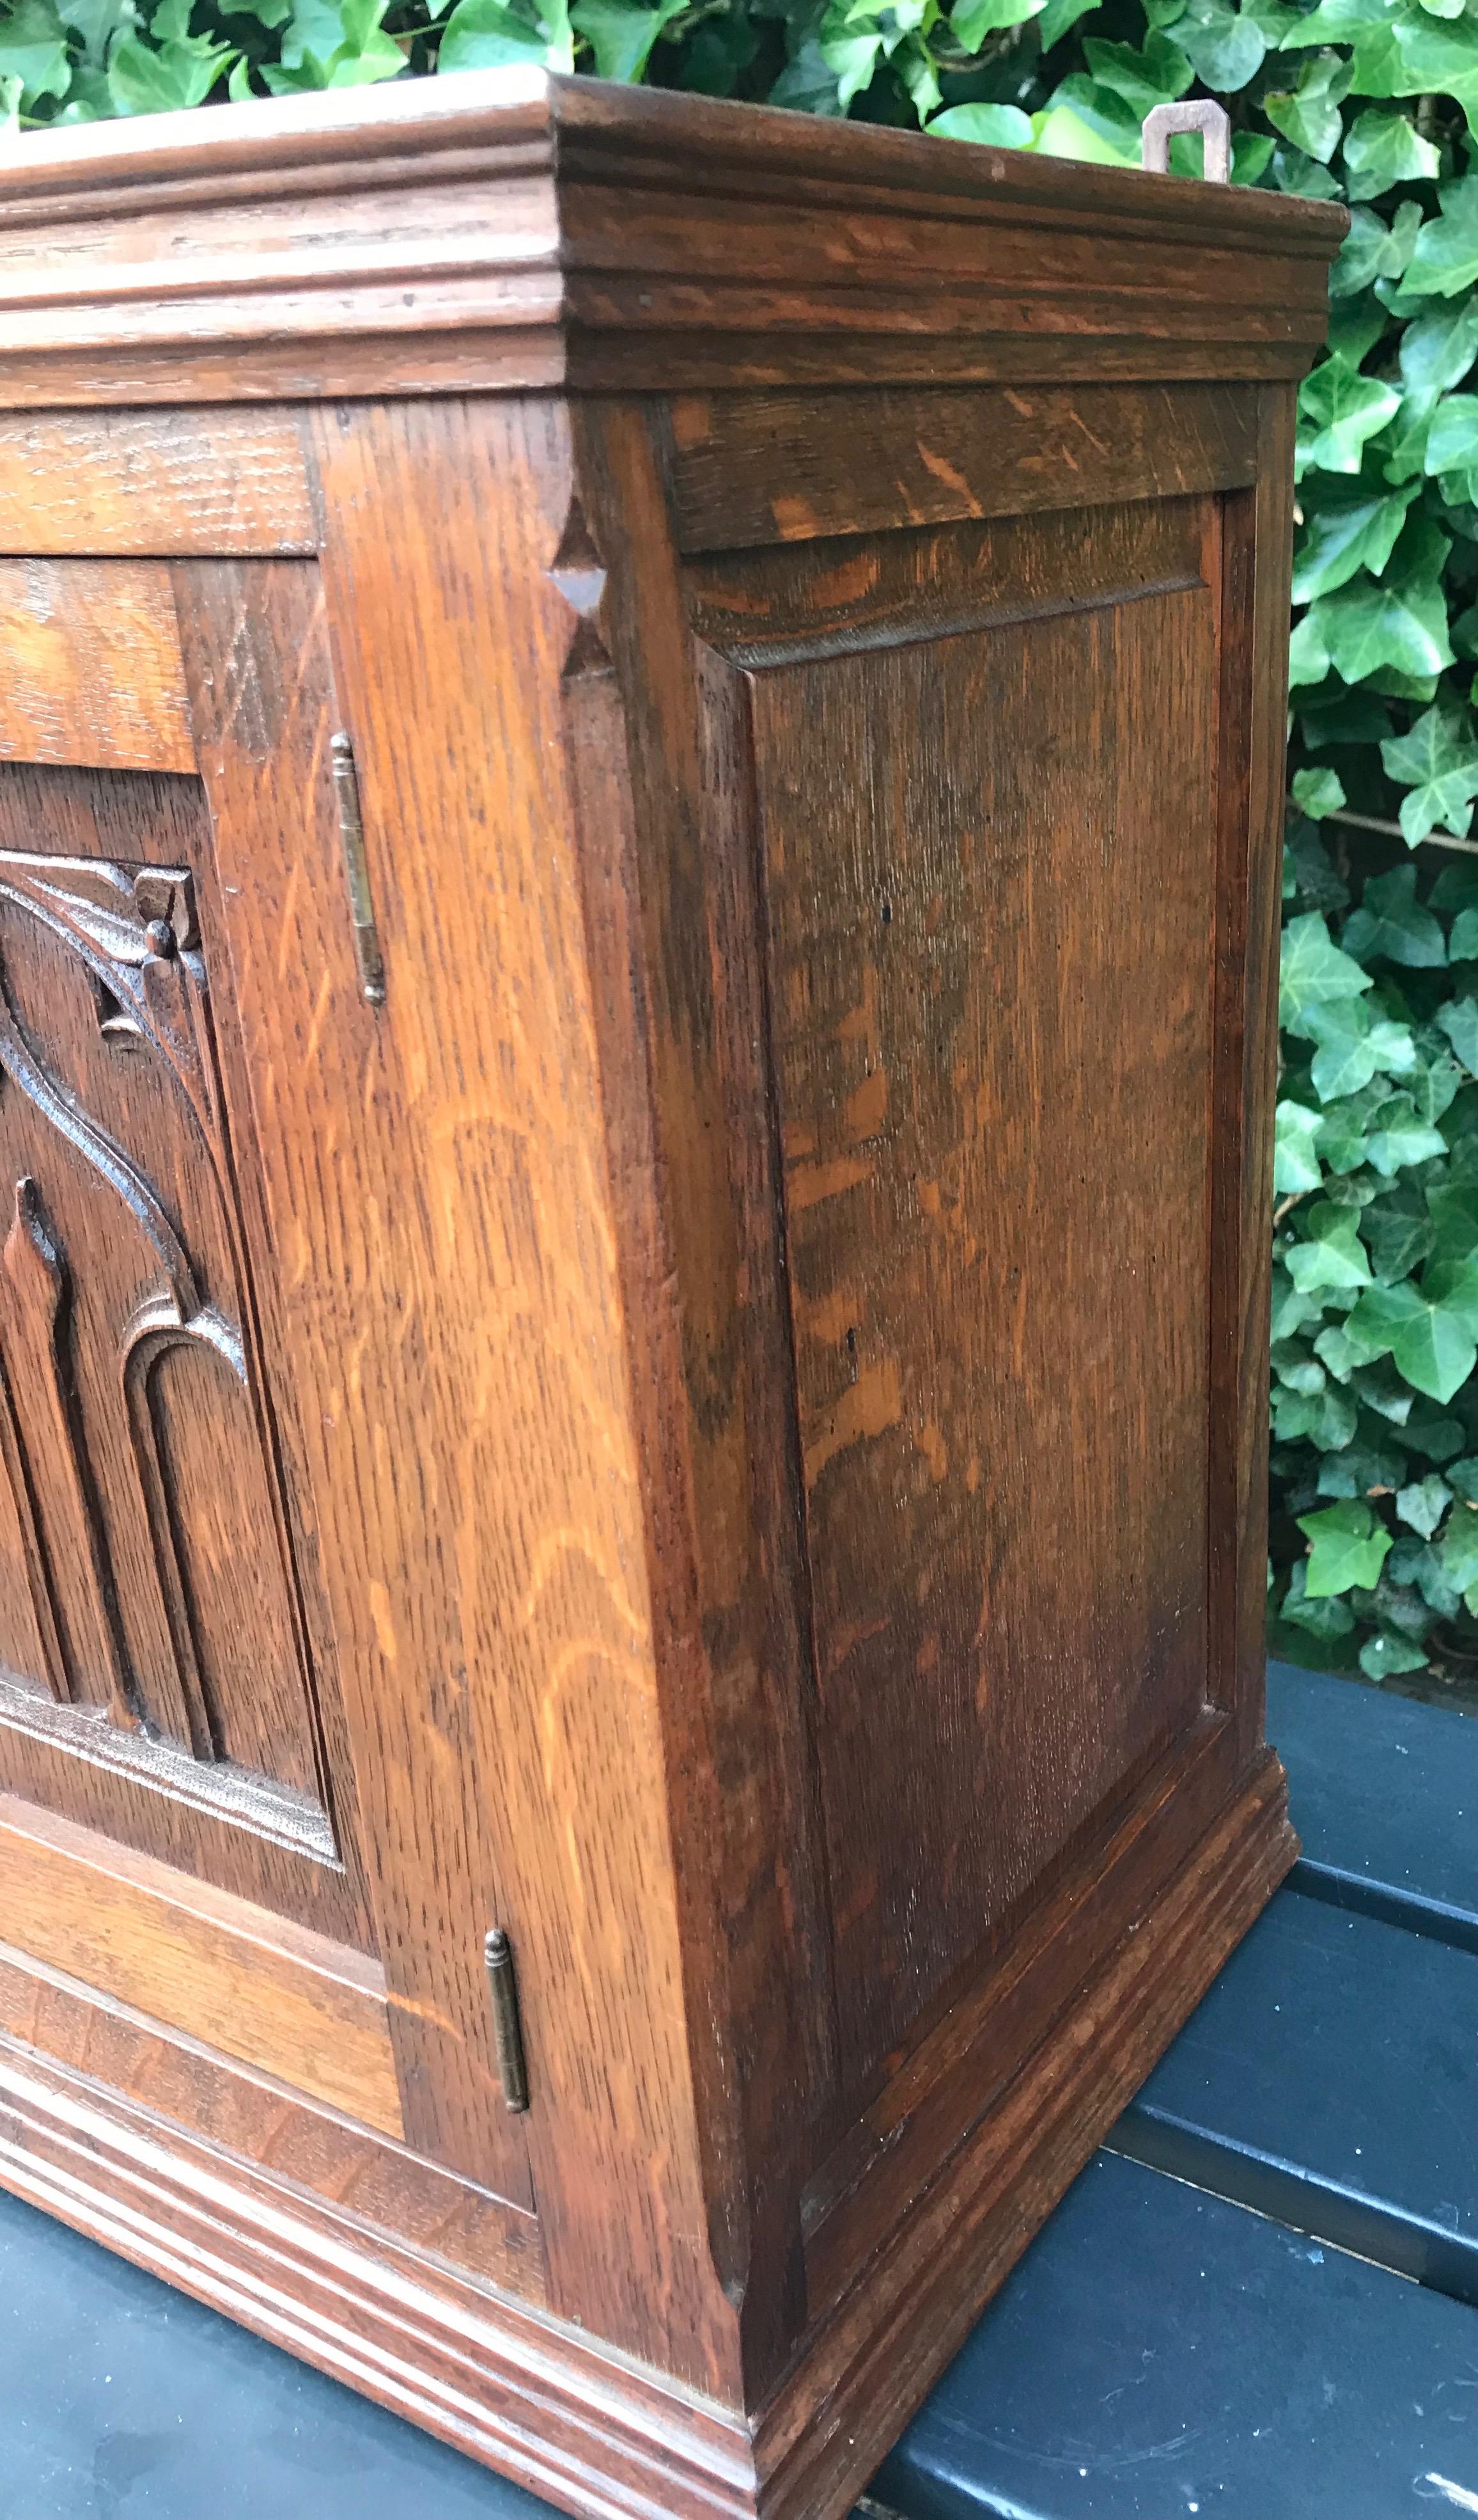 Hand-Carved Glorious Looking Antique Handcrafted Oak Gothic Revival Hanging Wall Cabinet